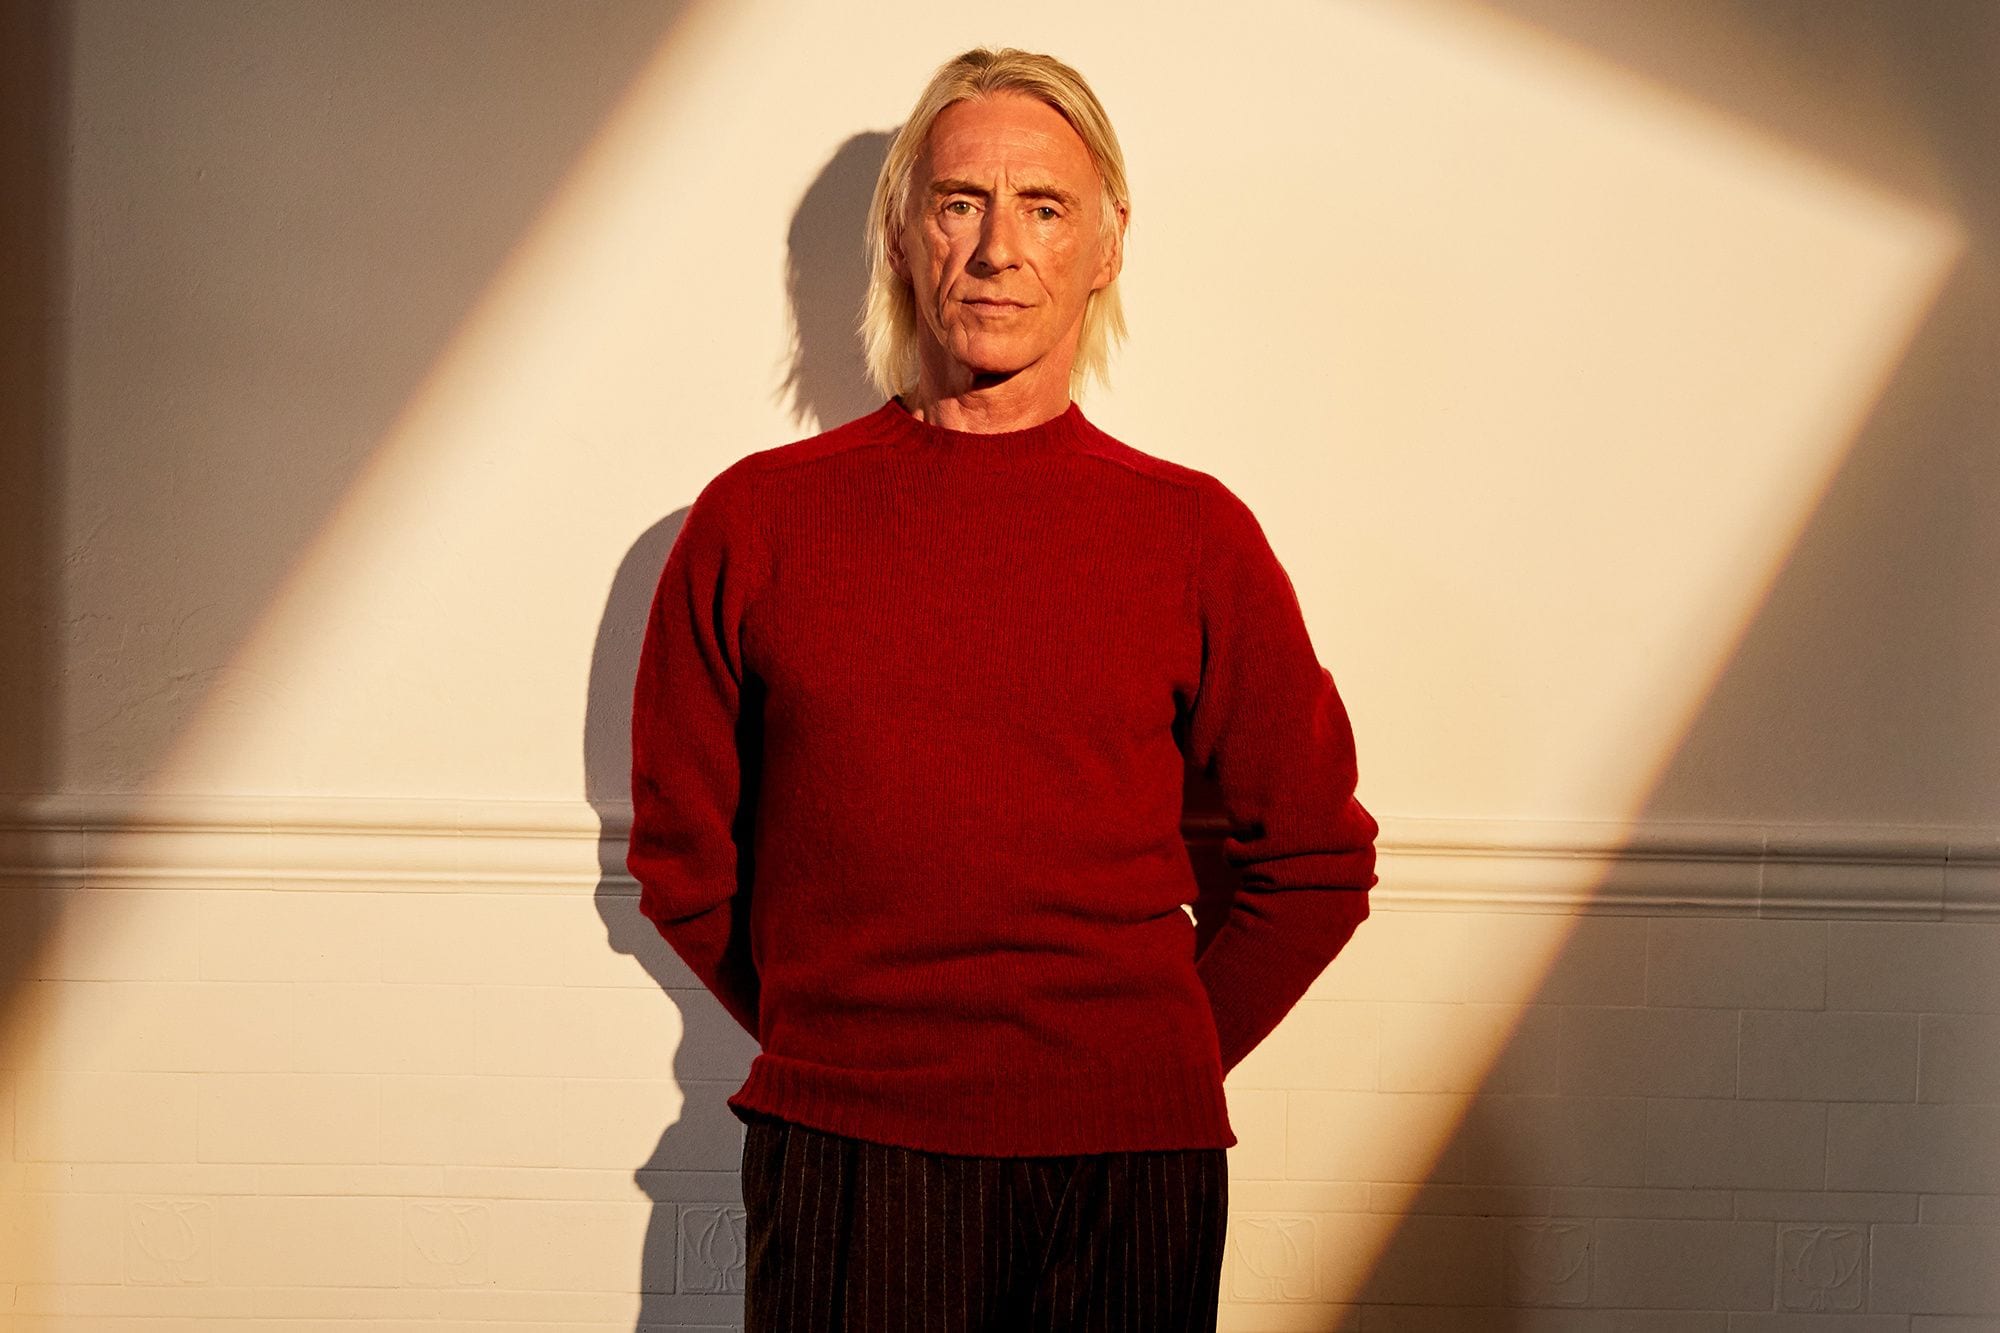 Paul Weller Discusses ‘On Sunset’ and the Post-Pandemic World